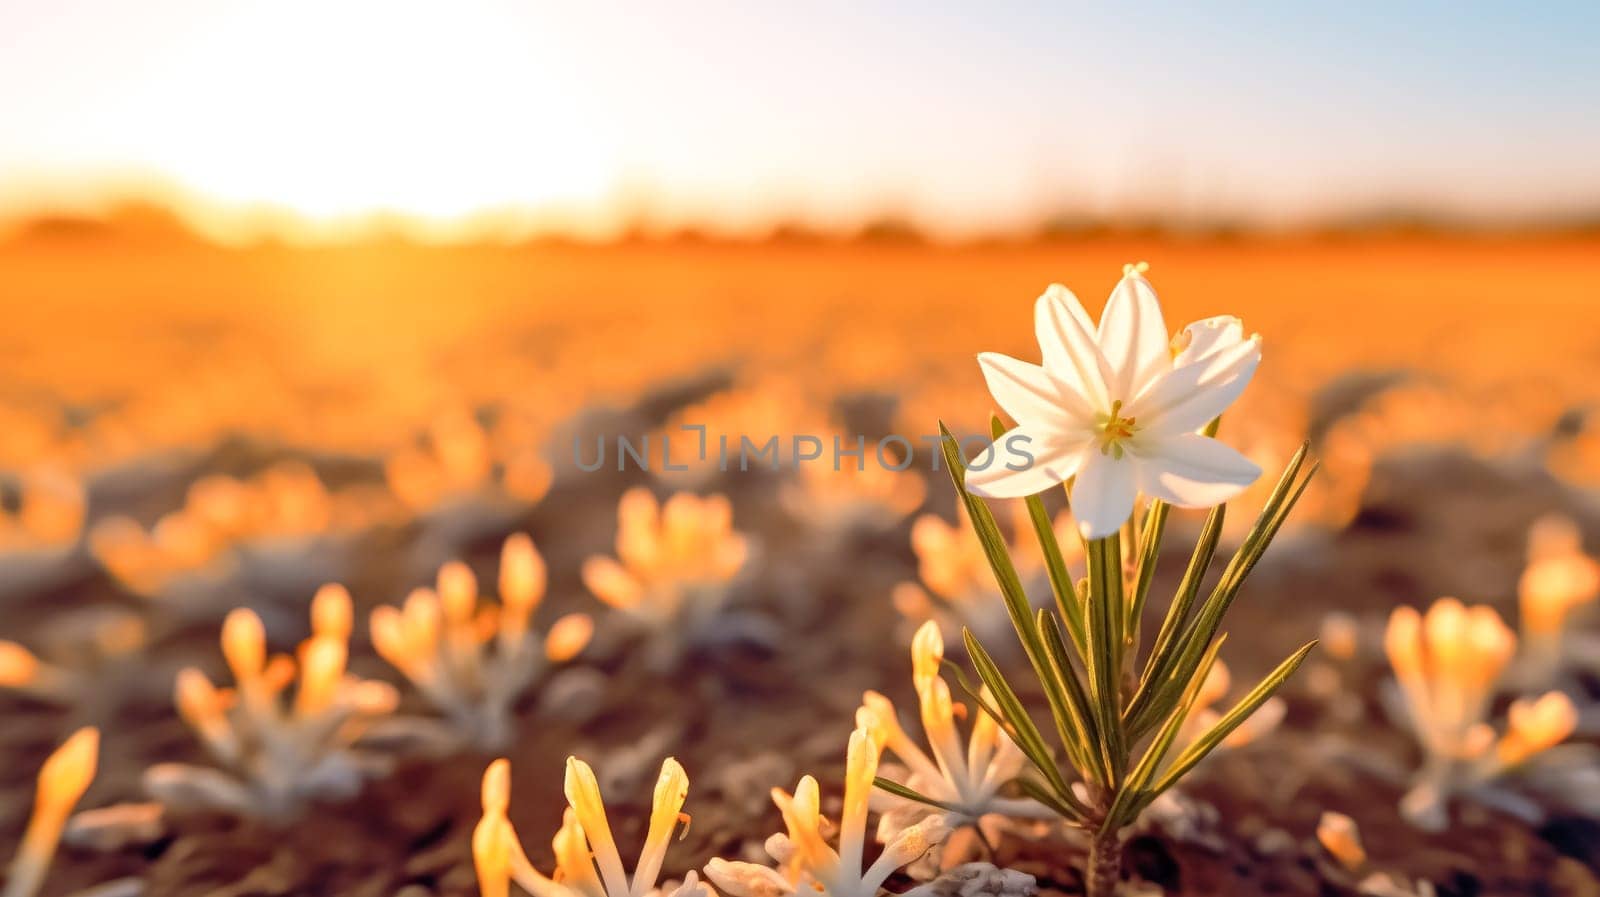 A single white flower is standing in a field of yellow flowers by Alla_Morozova93